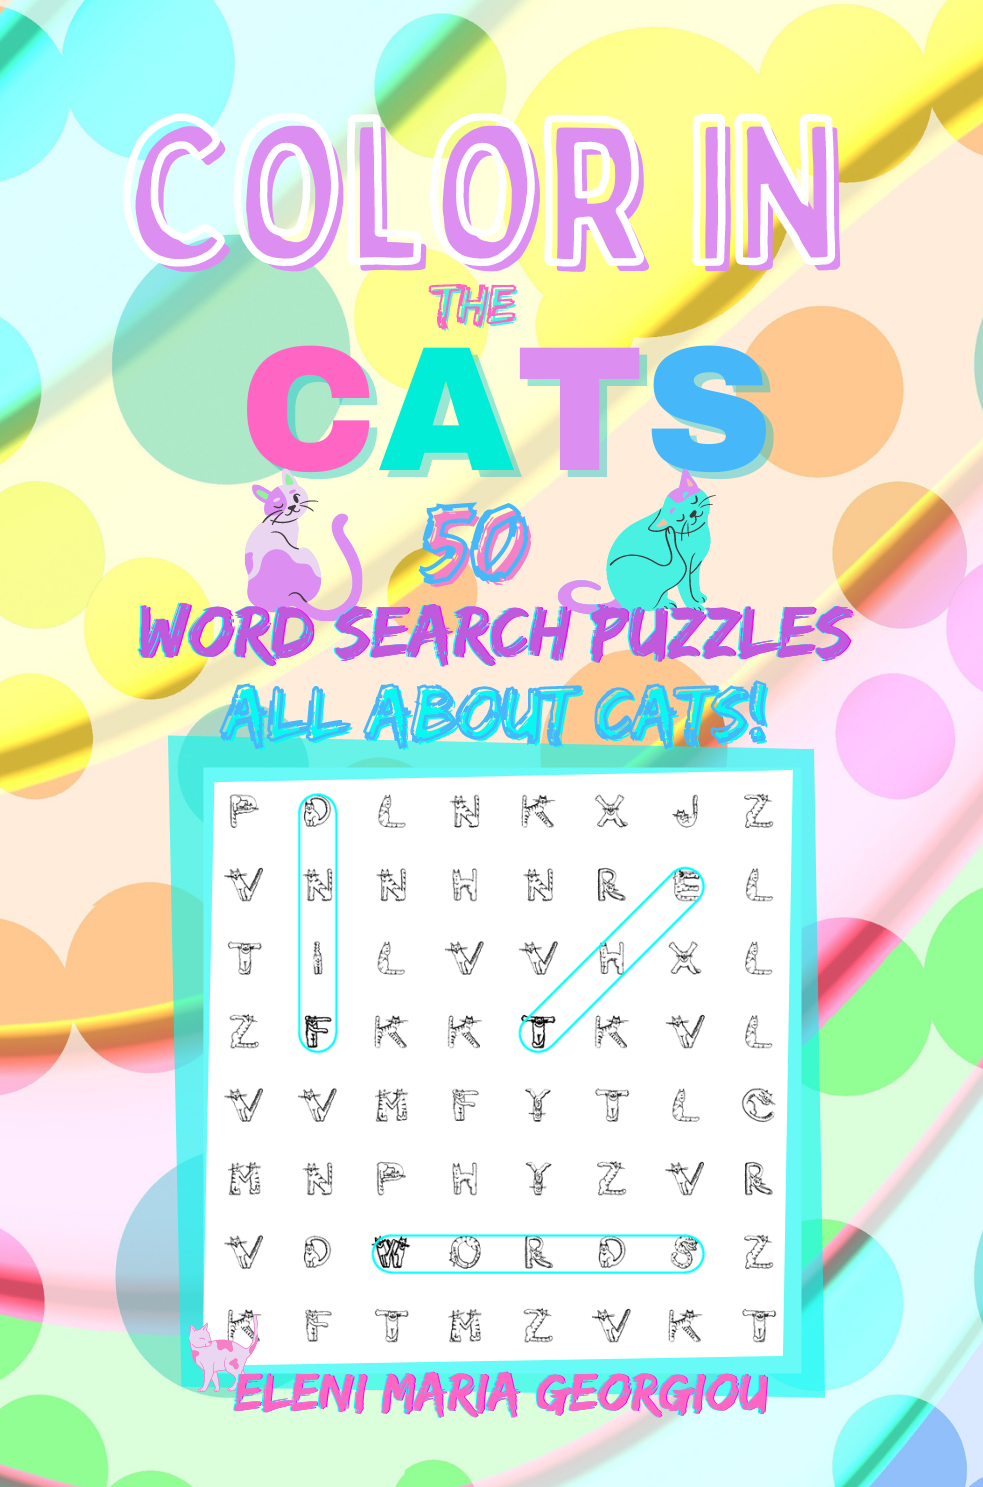 Color in the CATS: 50 Word Search Puzzles All About Cats!